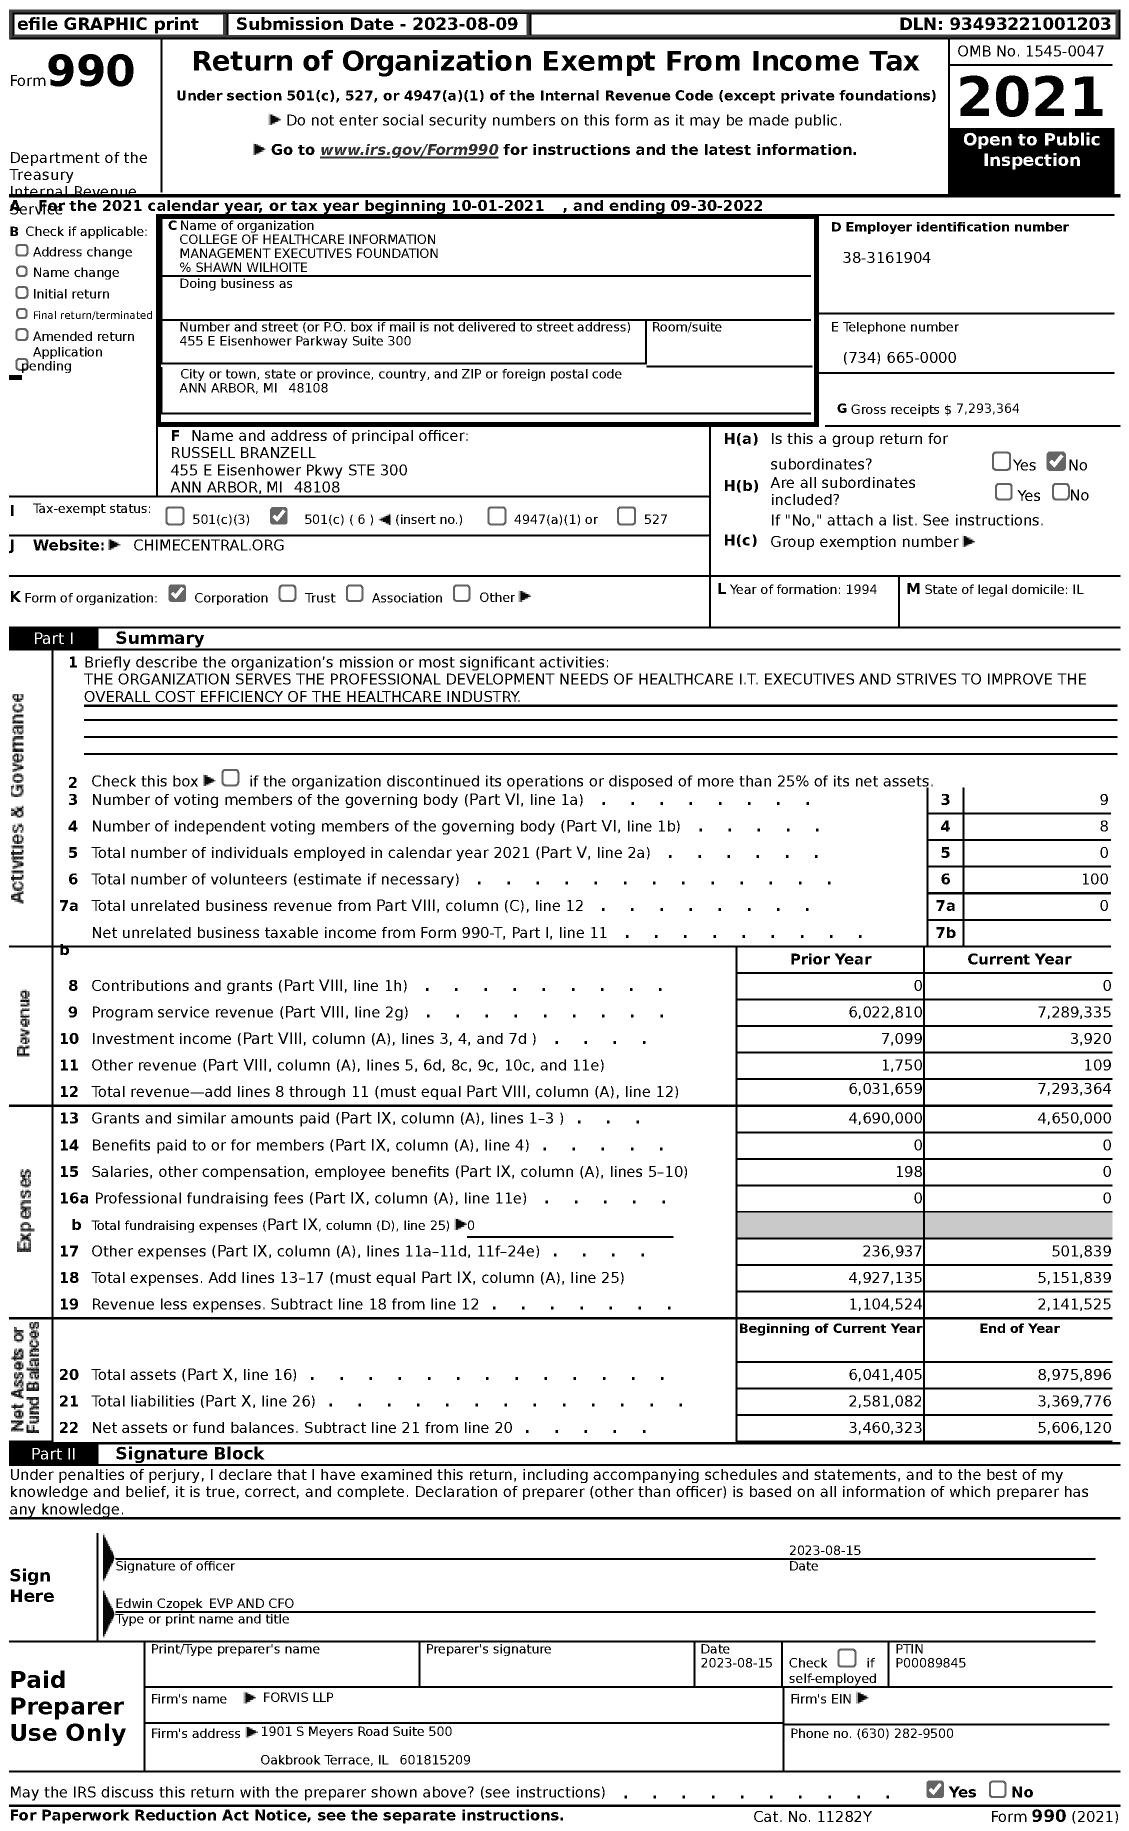 Image of first page of 2021 Form 990 for College of Healthcare Information Management Executives Foundation (CHIME)